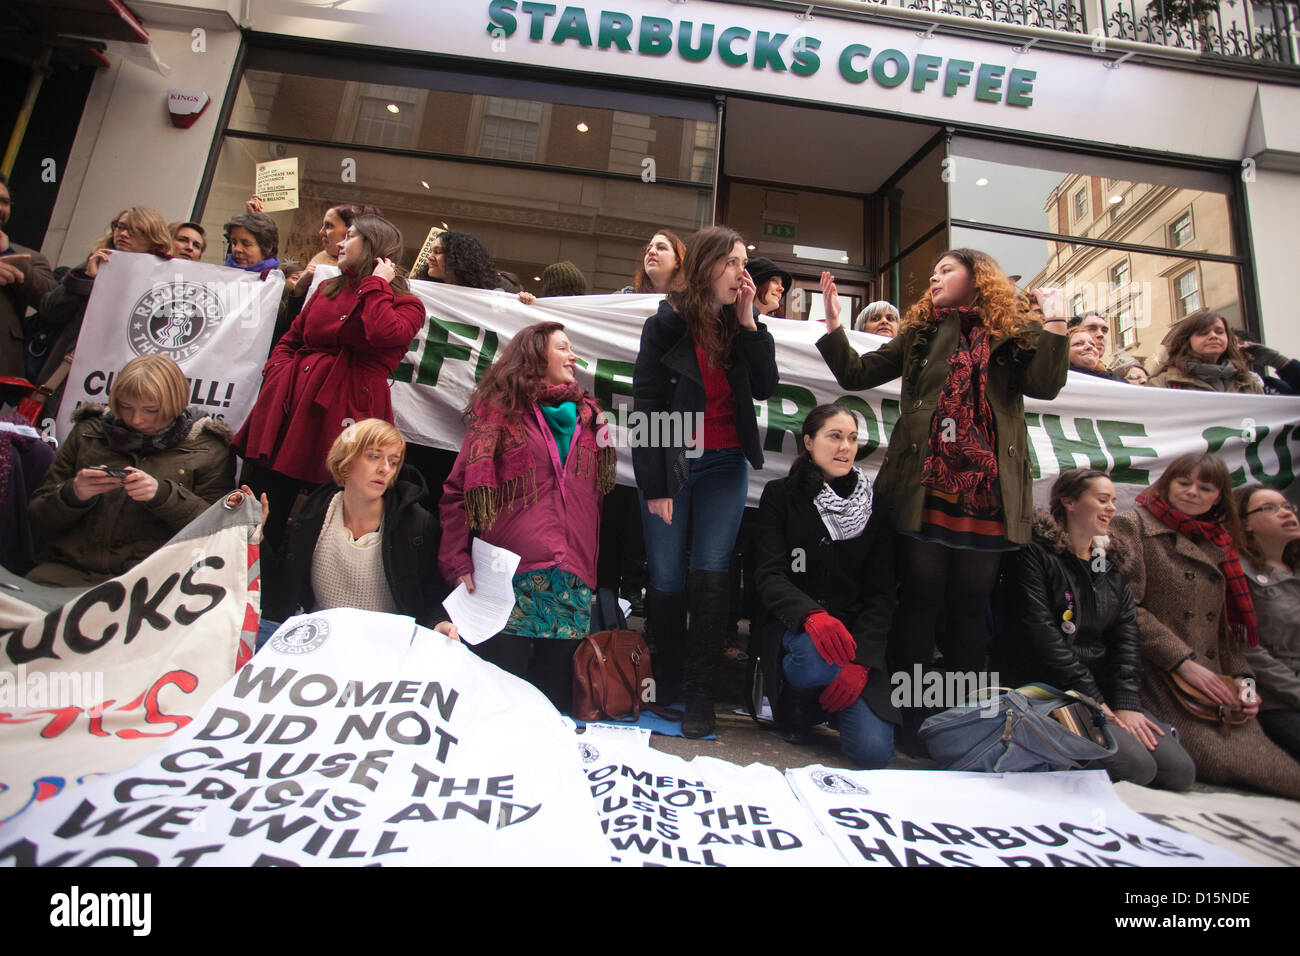 London, UK. 08.12.2012  UK Uncut protesters outside the Vigo Street branch. The protesters transformed Starbucks branches into services women depend on such as refuges and creches, arguing that public services cuts which disproportionately affect women could be prevented with the money gained if the government clamped down on corporate tax avoidance. Stock Photo